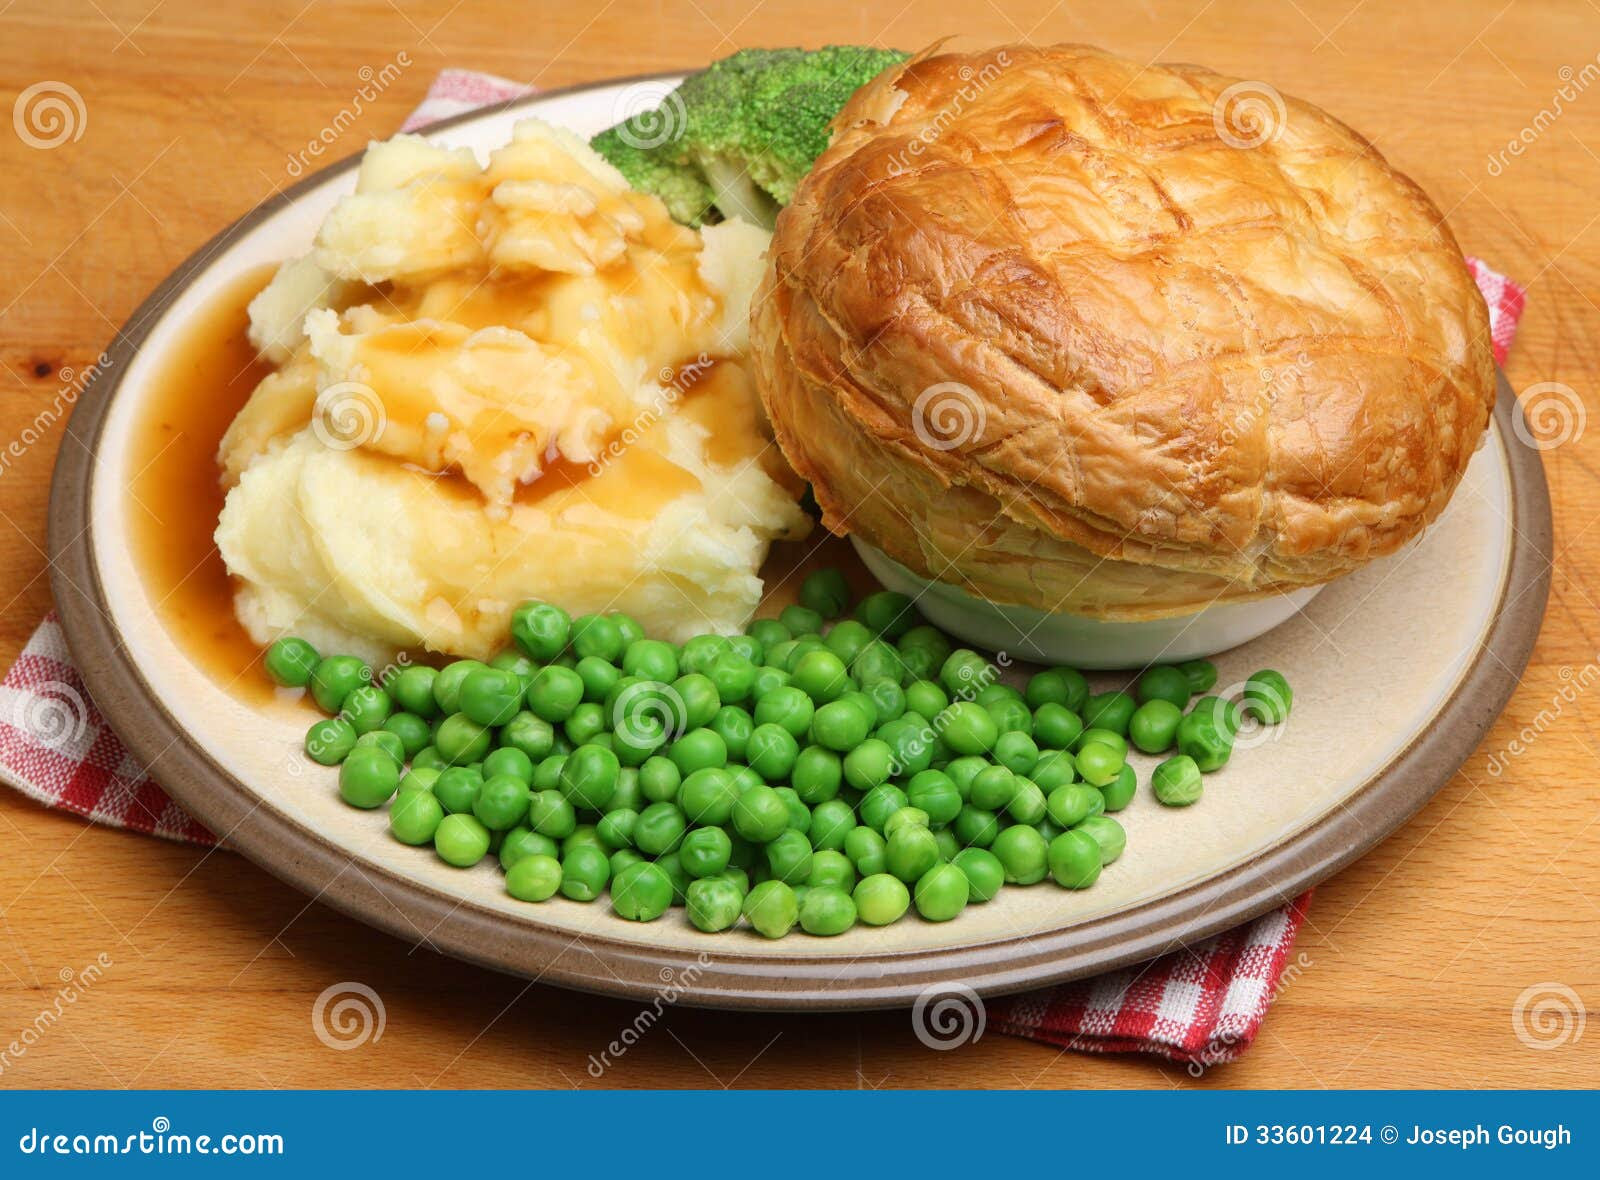 Steak Pie With Mash And Peas Stock Images - Image: 33601224